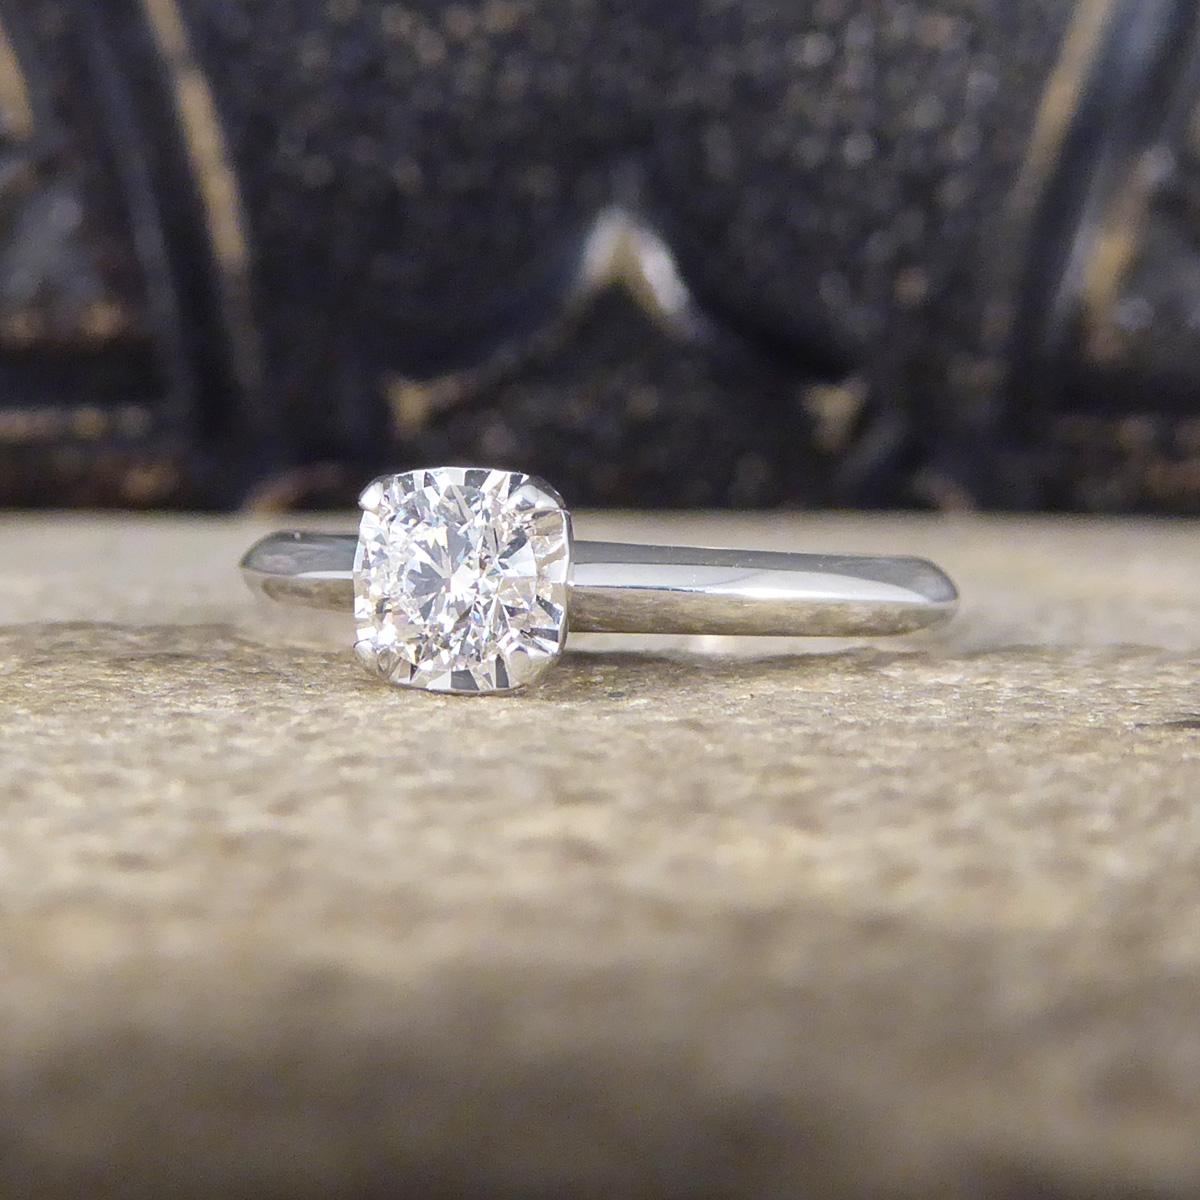 Diamond Solitaire Ring with a Cushion Cut Illusion in White Gold In New Condition For Sale In Yorkshire, West Yorkshire